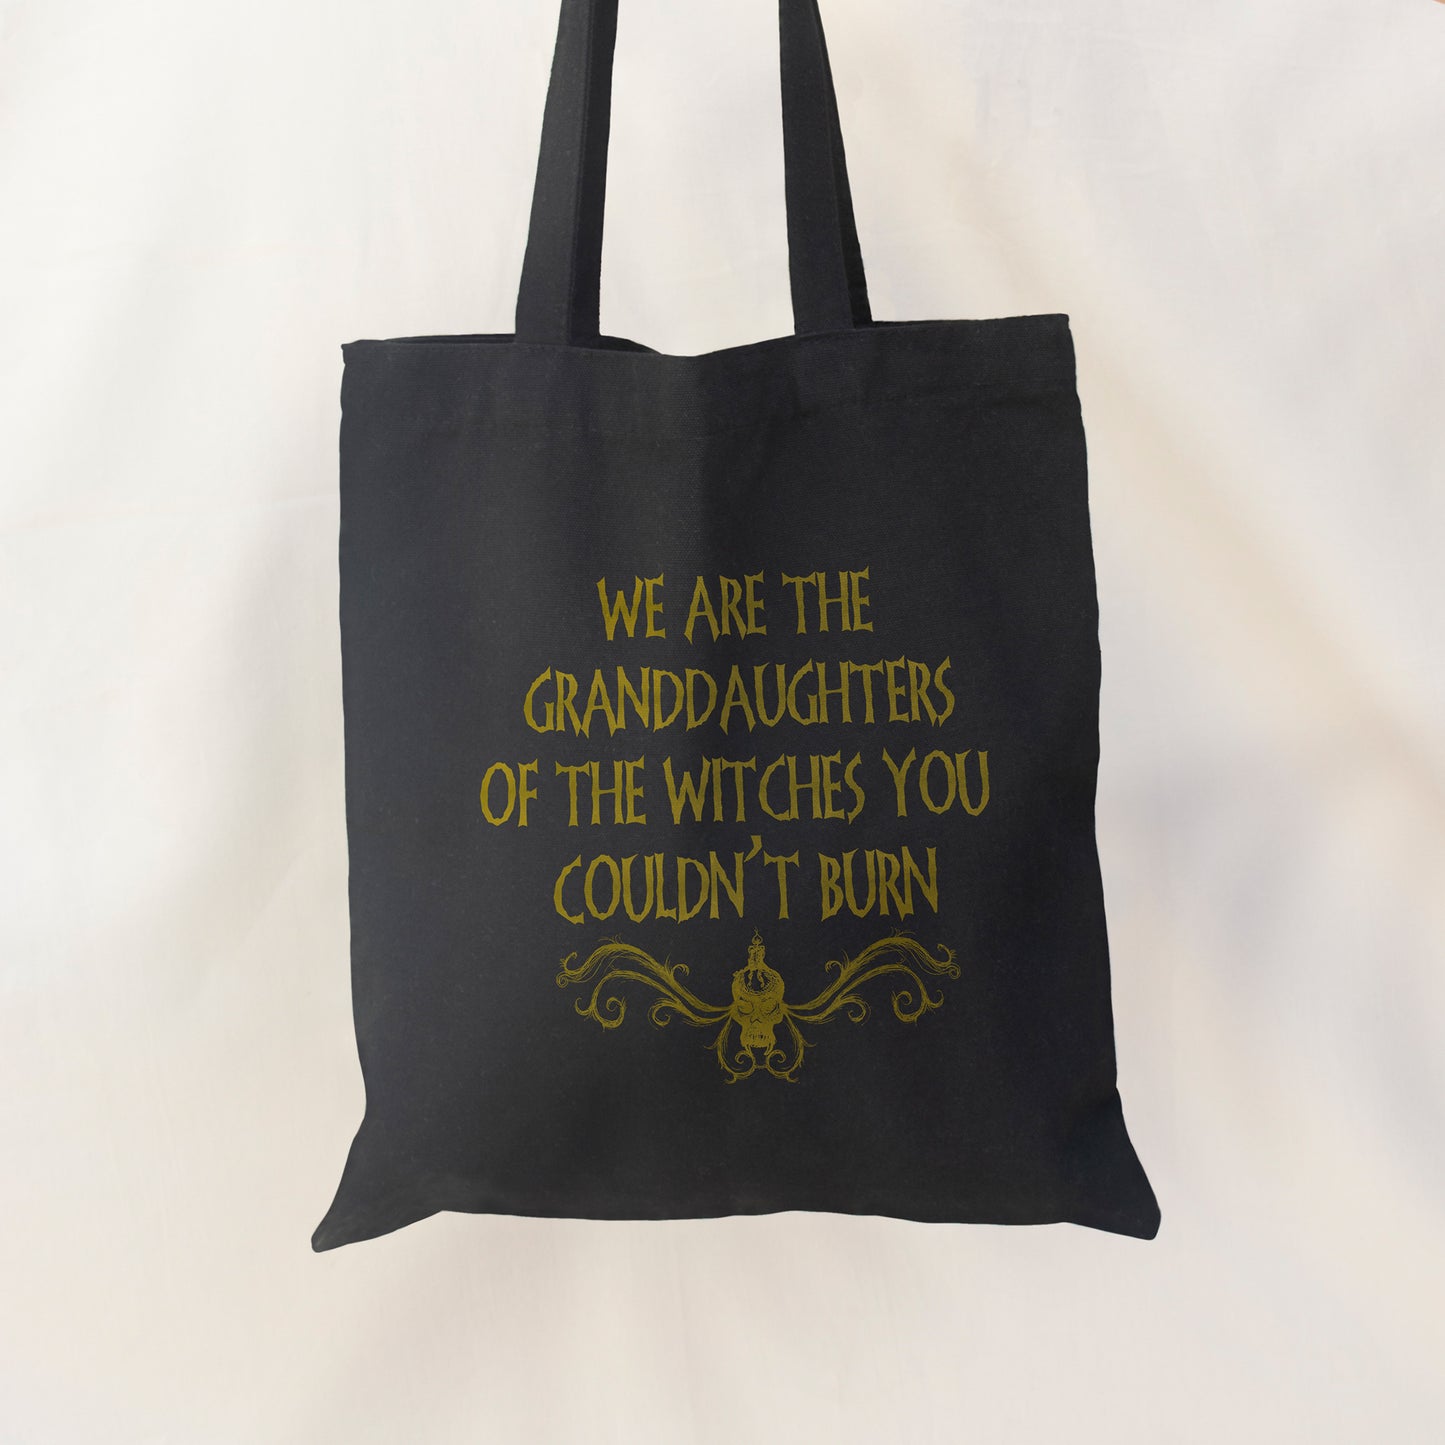 GRANDDAUGHTERS OF THE WITCHES YOU COULDN'T BURN TOTE BAG - TB004